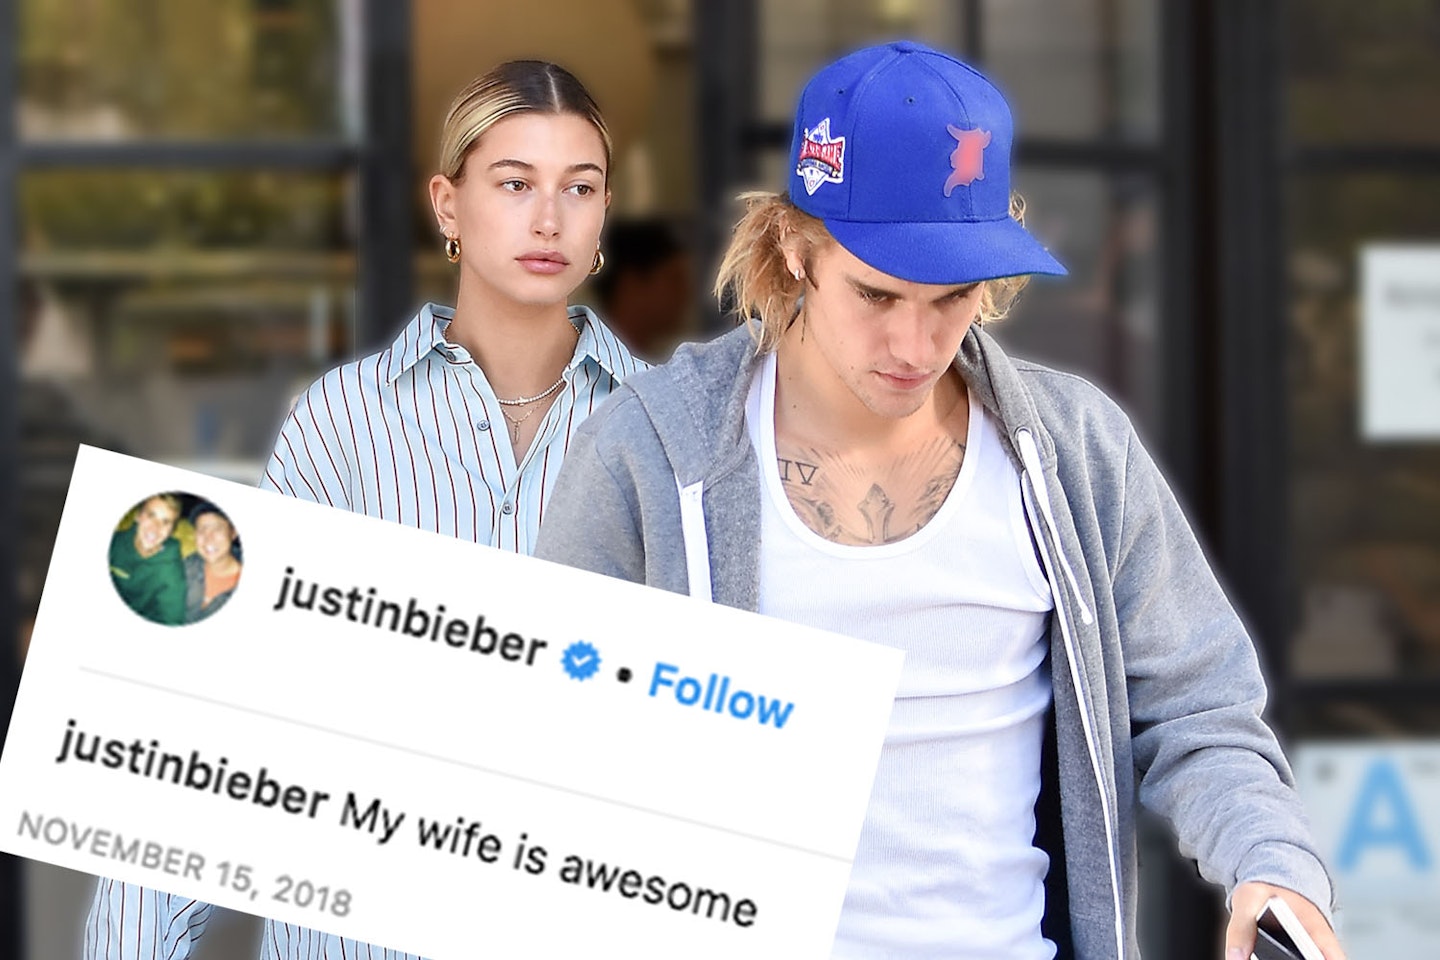 Justin Bieber 'Peaches' Lyrics & Meaning Explained As He Sings